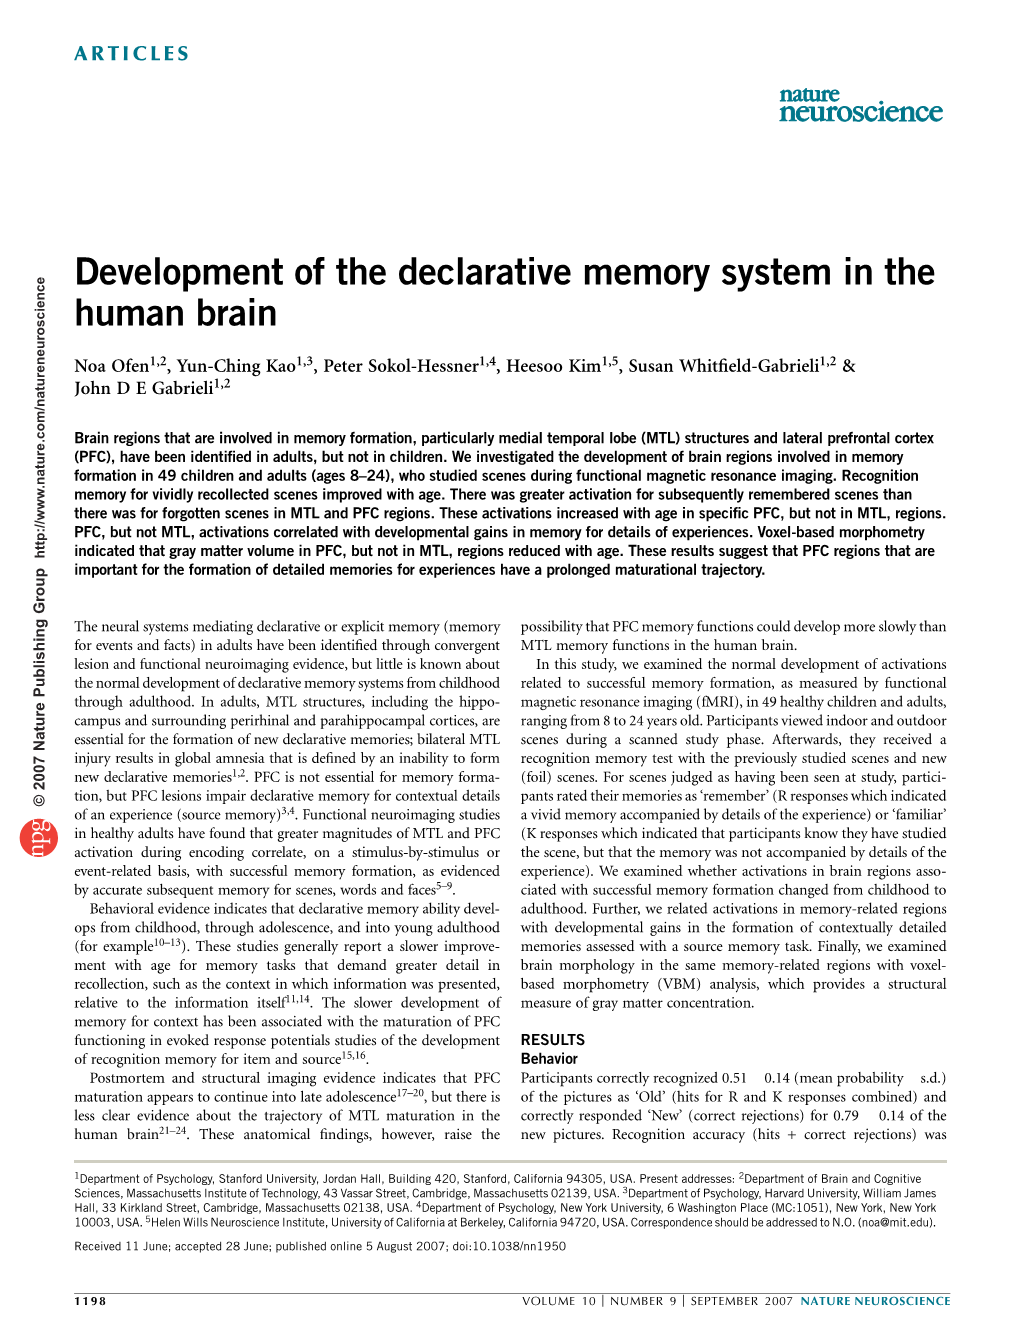 Development of the Declarative Memory System in the Human Brain